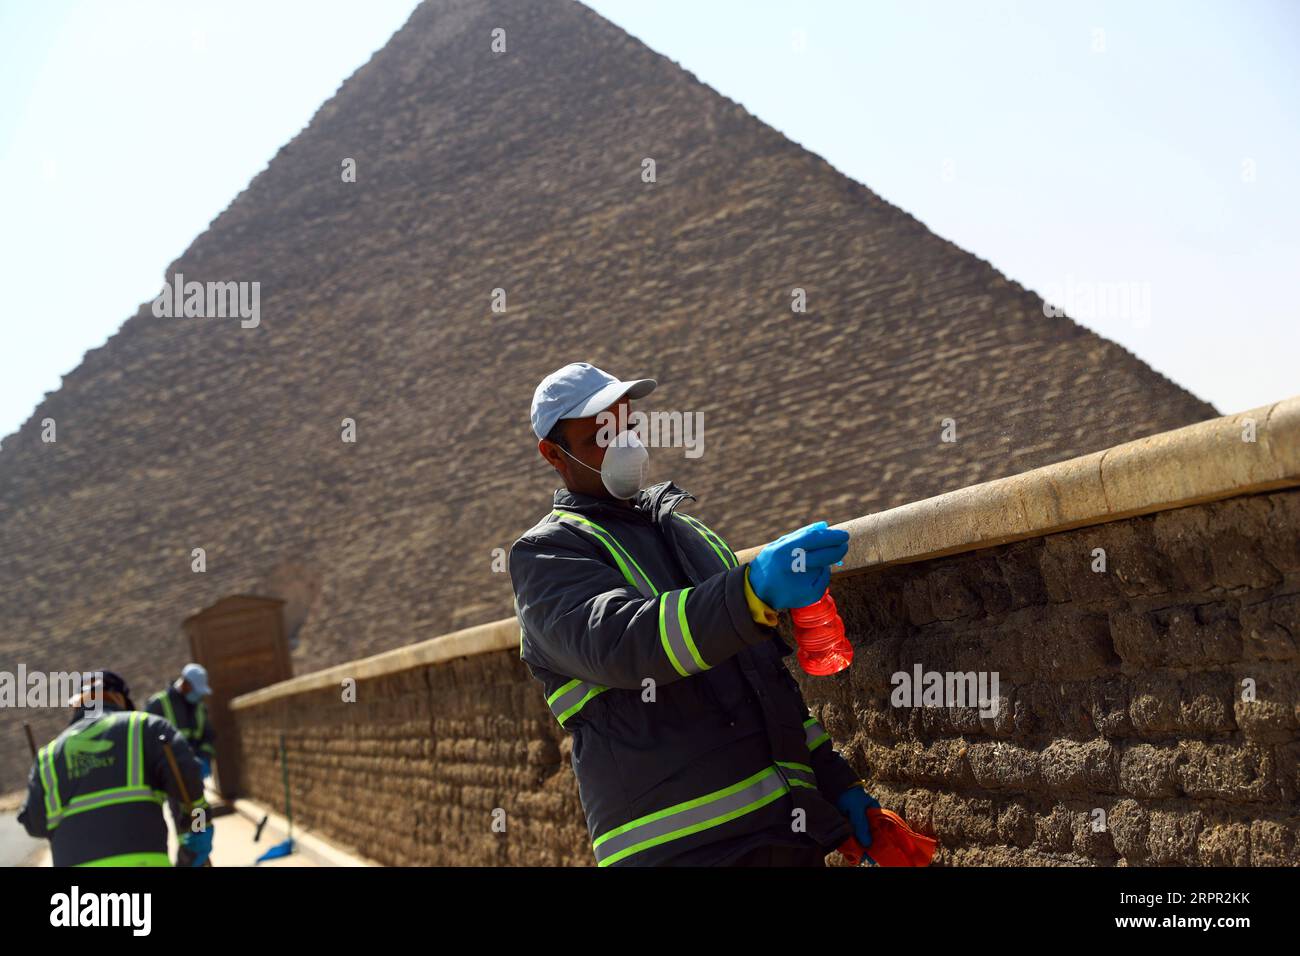 200325 -- GIZA, March 25, 2020 Xinhua -- A staff member disinfects near the Pyramids in Giza, Egypt, March 25, 2020. Egypt announced on Tuesday that one COVID-19 case died and 36 new cases were detected, bringing the total number of cases in the country to 402. Xinhua/Ahmed Gomaa EGYPT-GIZA-PYRAMIDS-DISINFECTION PUBLICATIONxNOTxINxCHN Stock Photo